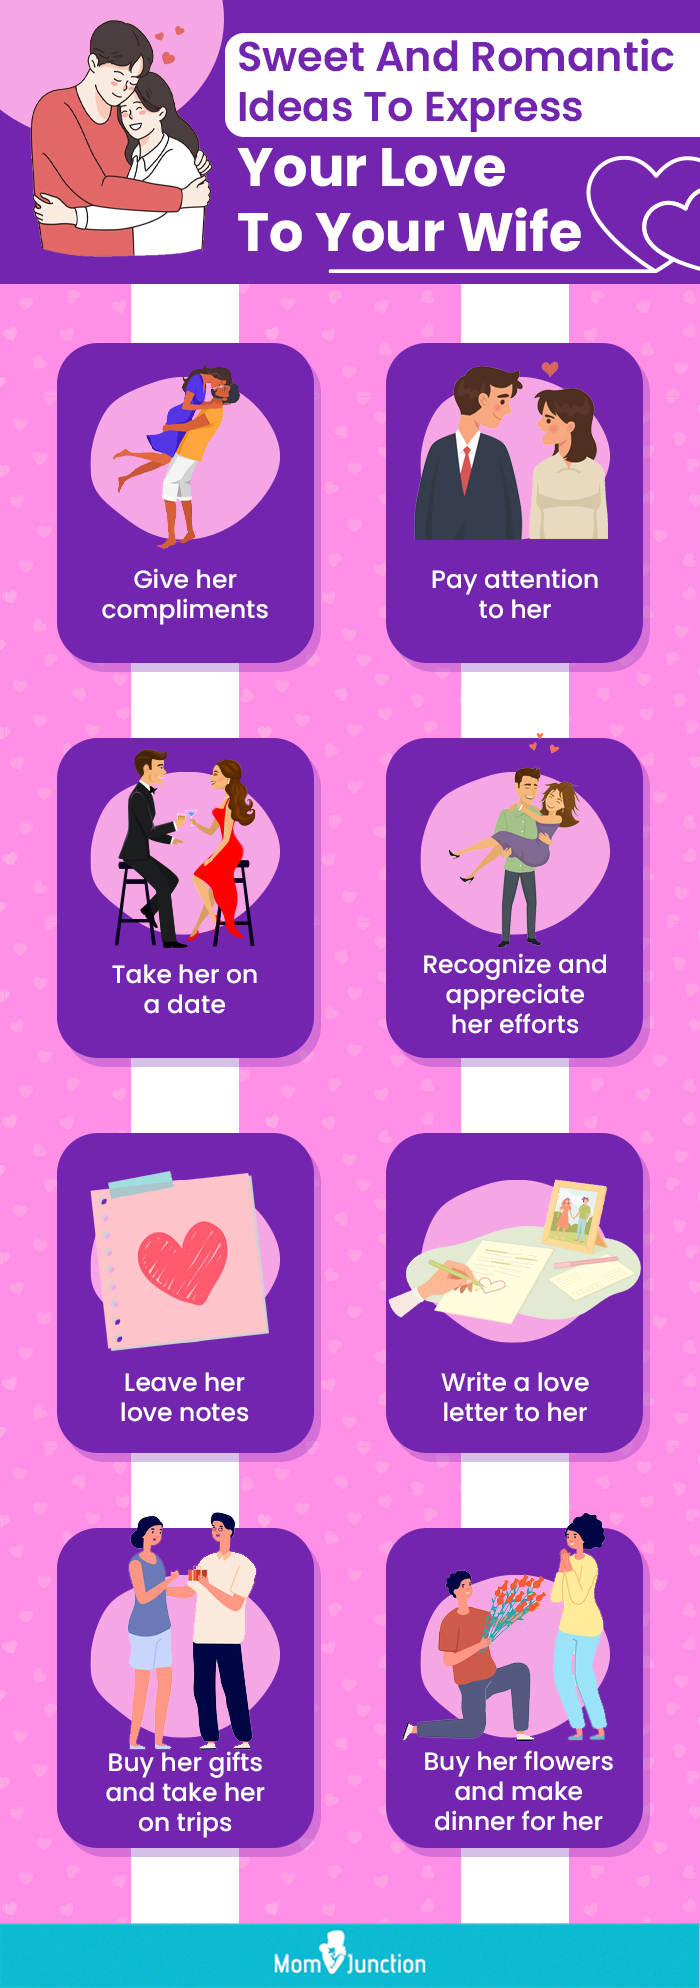 sweet and romantic ideas to express your love to your wife (infographic)